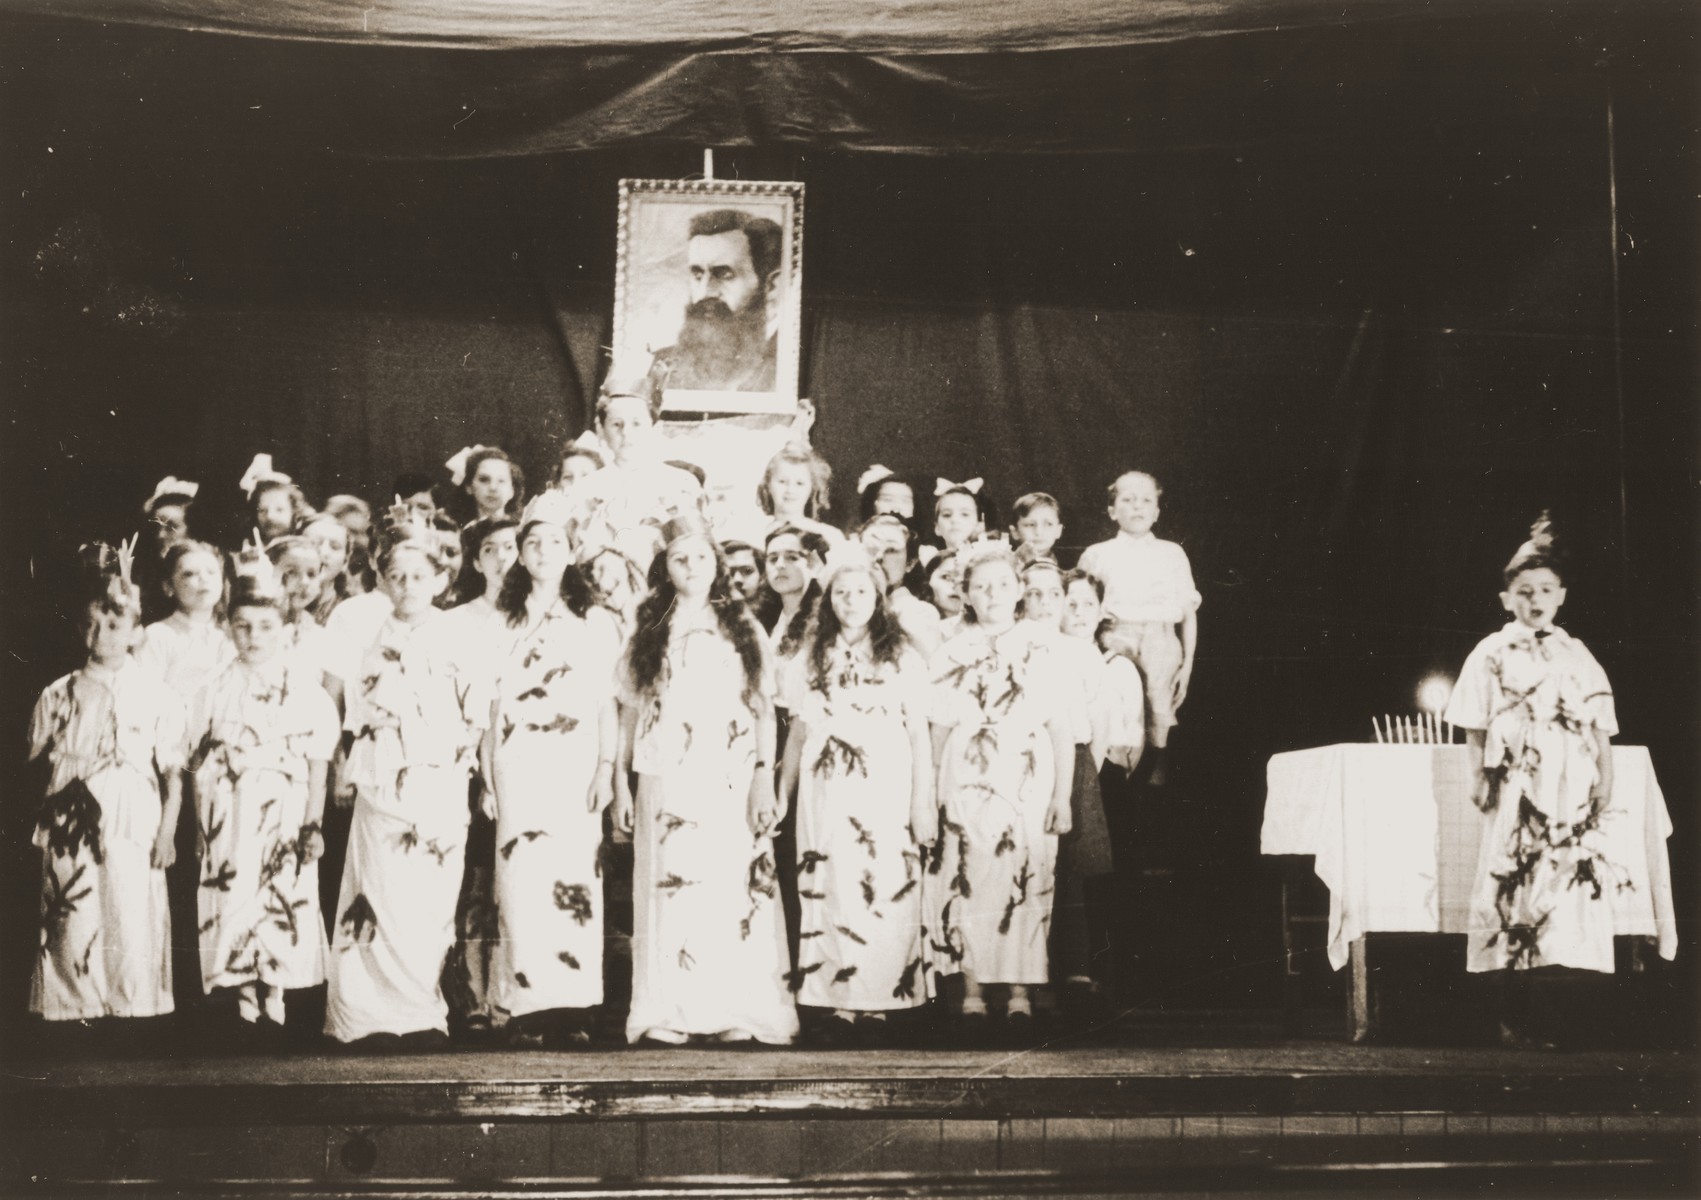 Children put on a Hannuka play in front of a portrait of Theodore Herzl in the Feldafing DP camp.